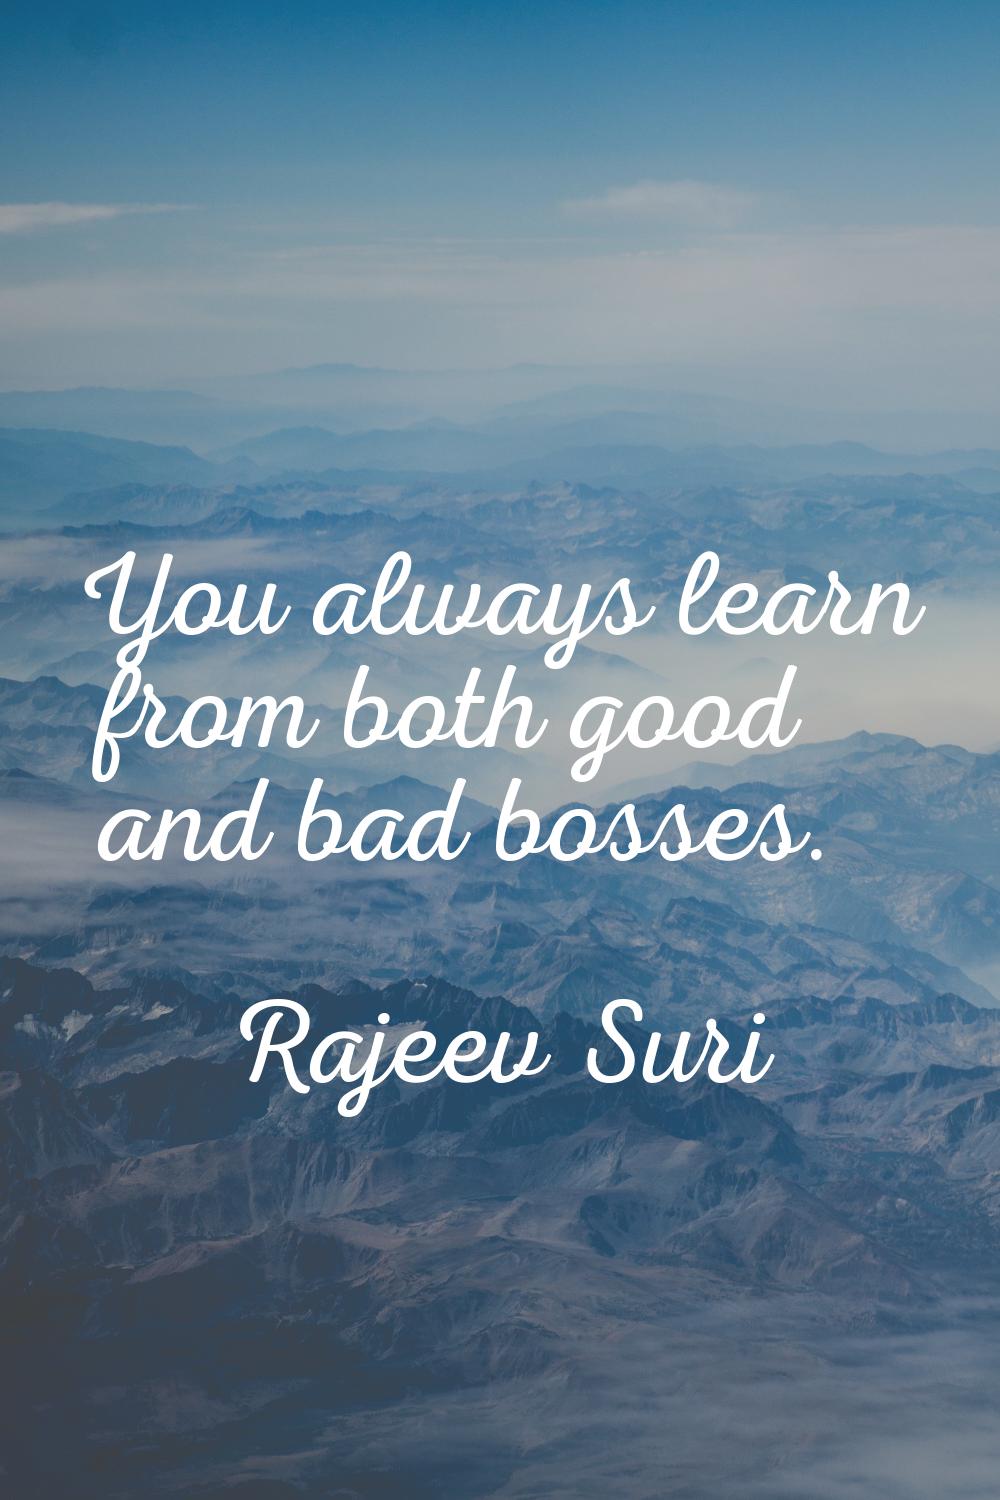 You always learn from both good and bad bosses.